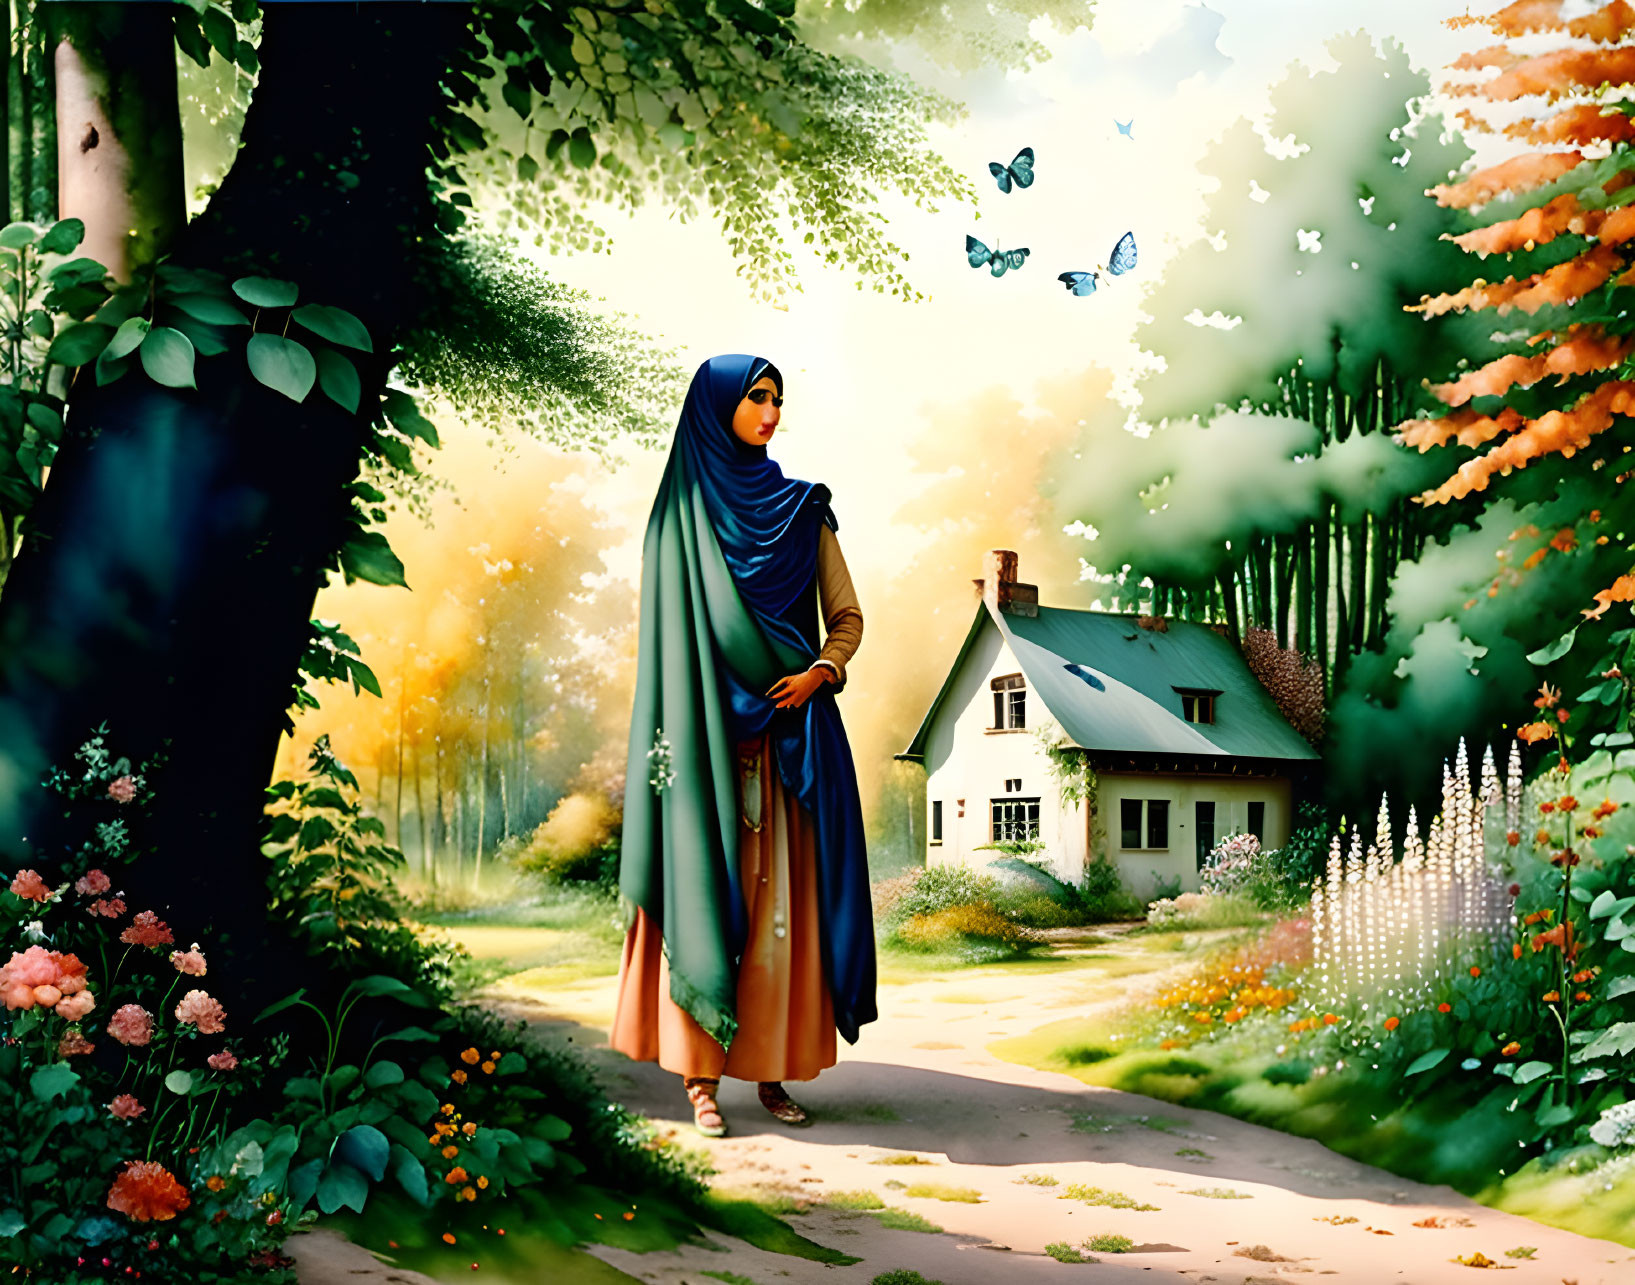 Woman in hijab near lush greenery and butterflies in forest.